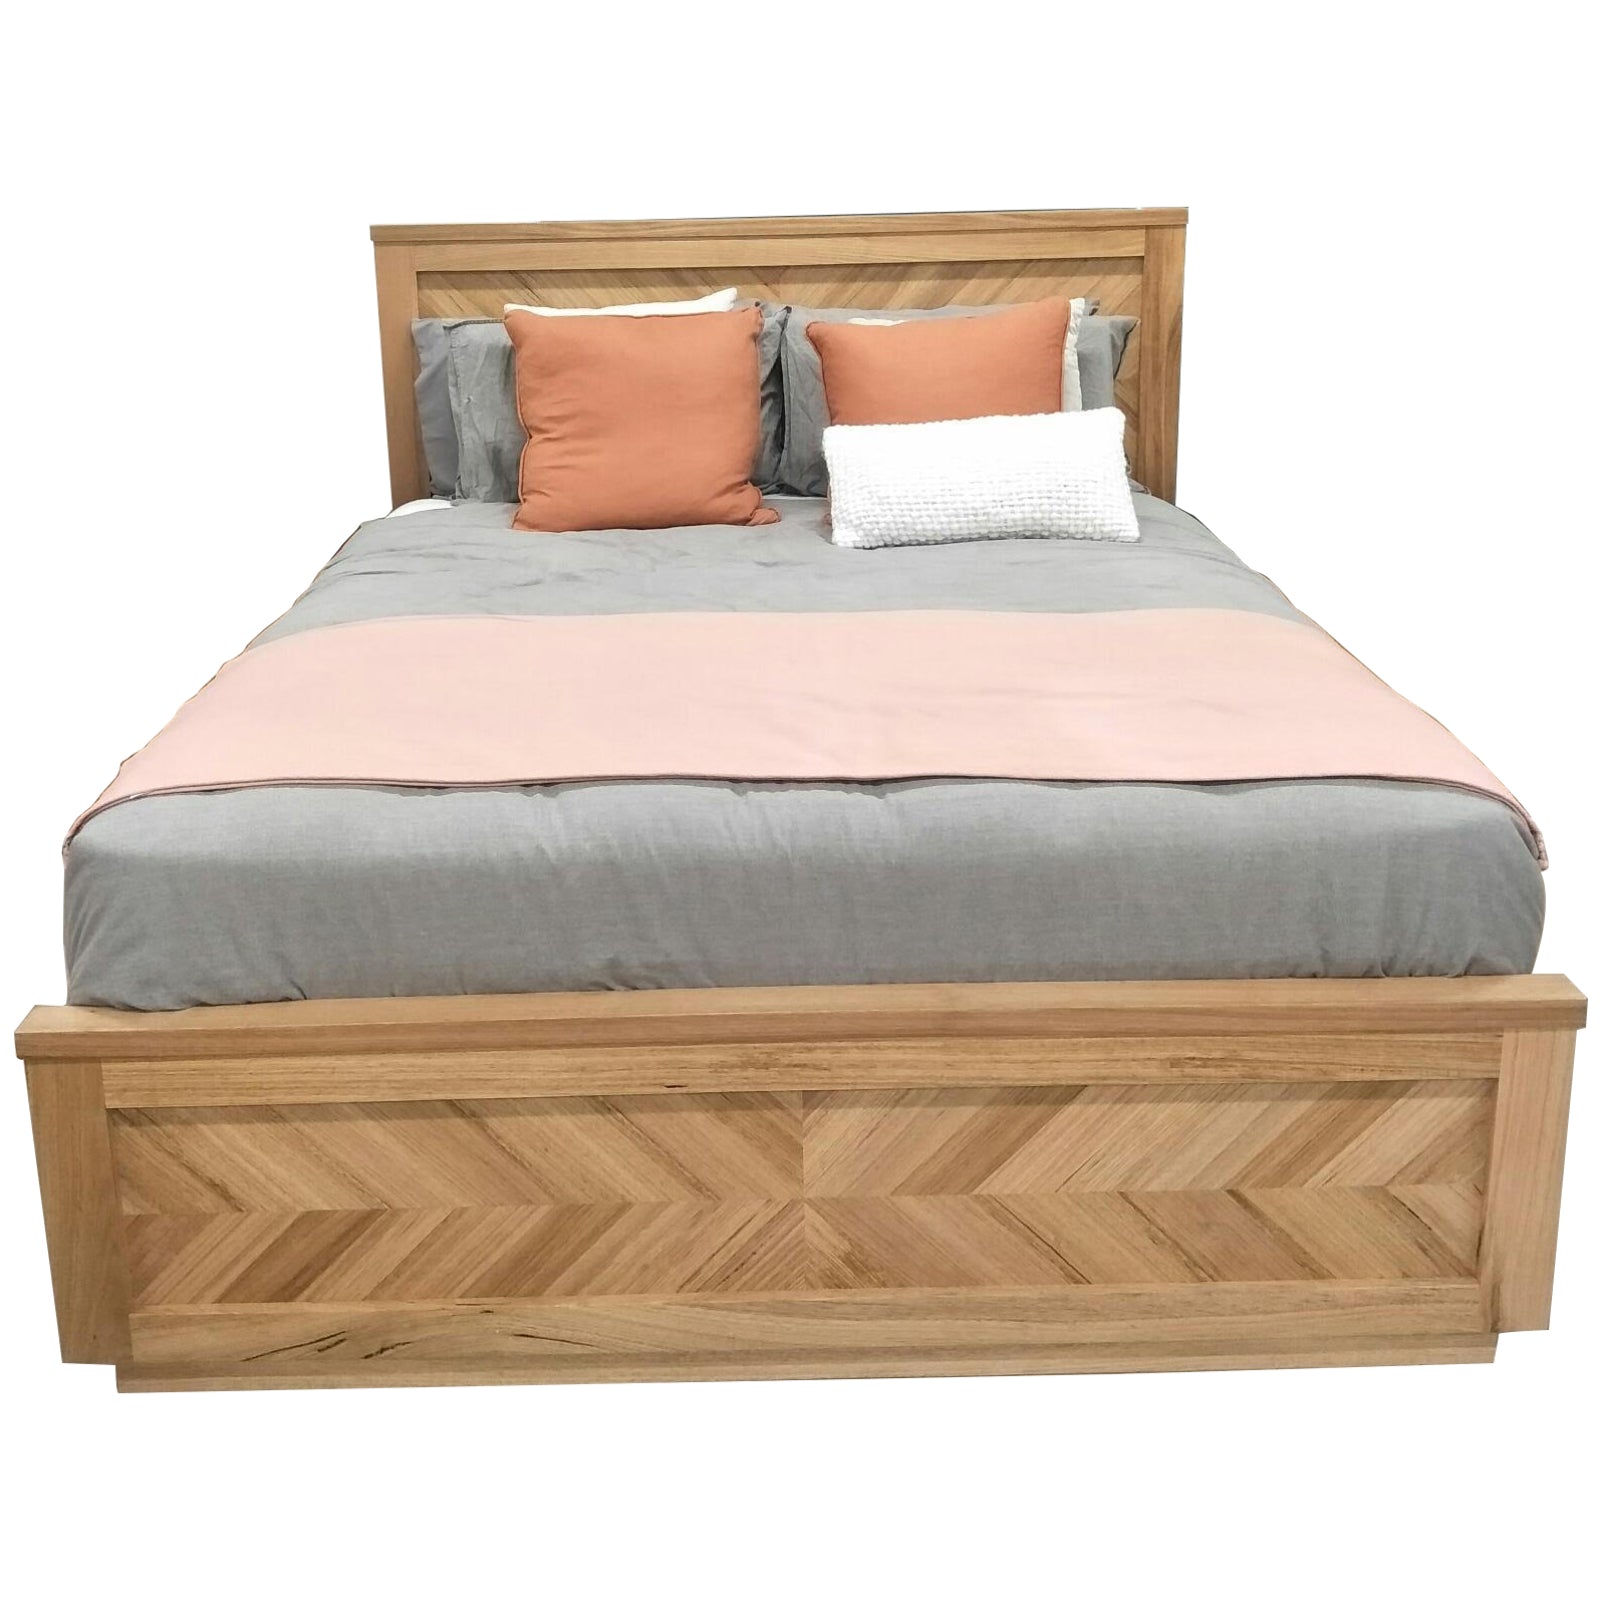 Queen Size Bed Rosemallow Parquet Solid Messmate Timber Frame Mattress Base